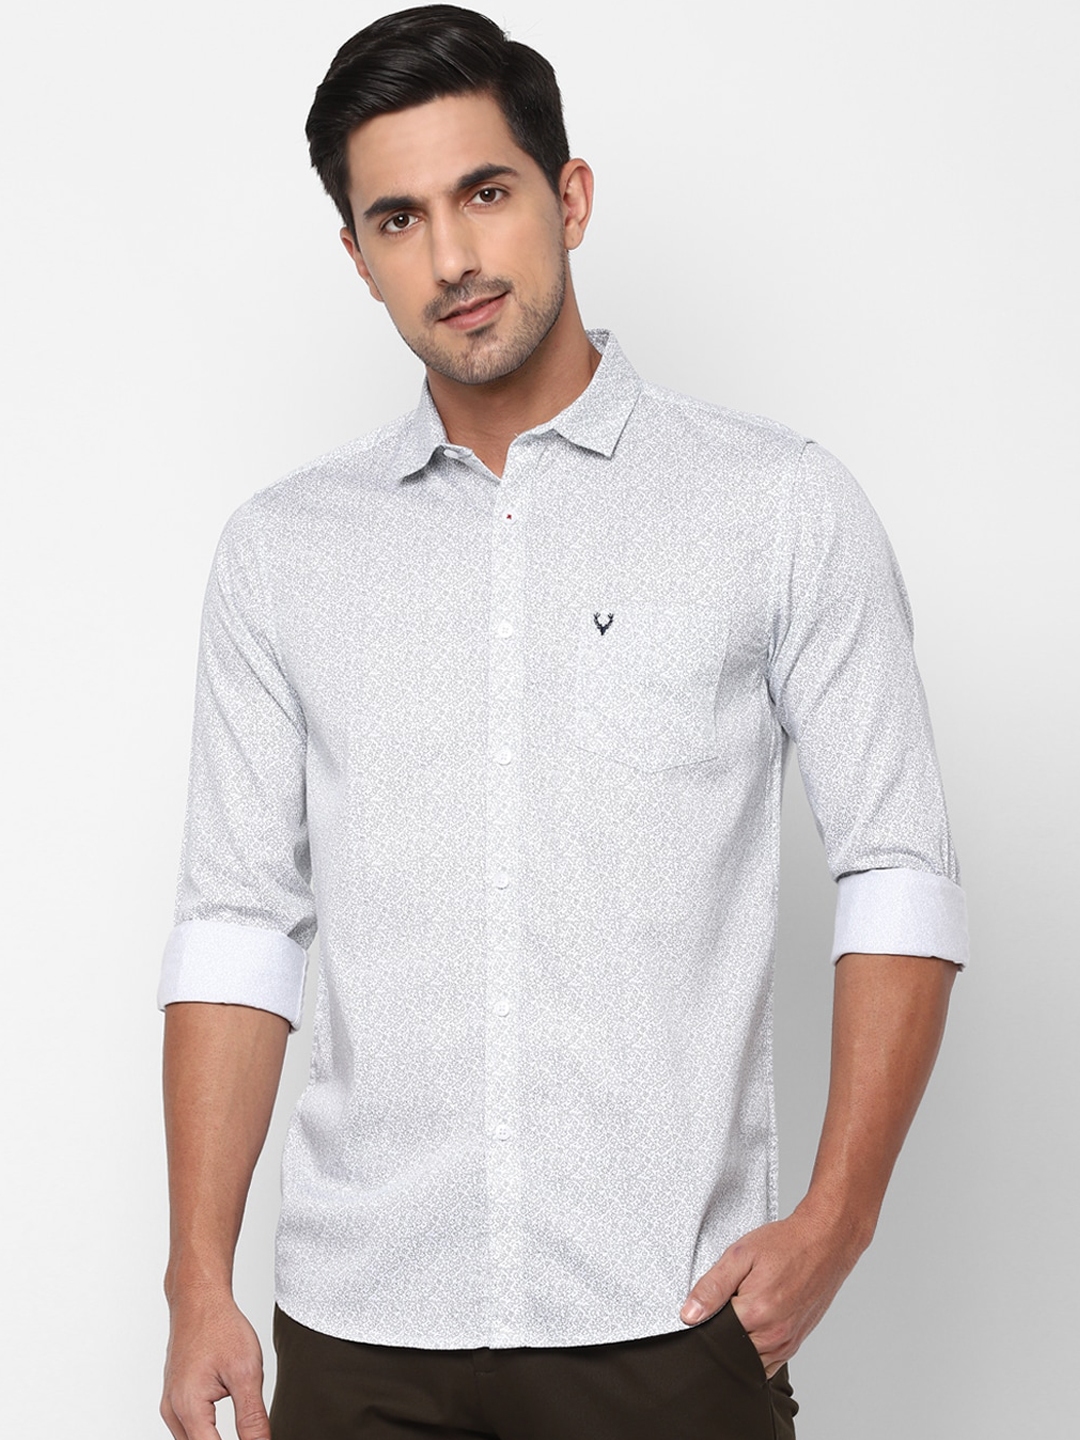 Buy Allen Solly Men White Slim Fit Printed Casual Cotton Shirt - Shirts ...